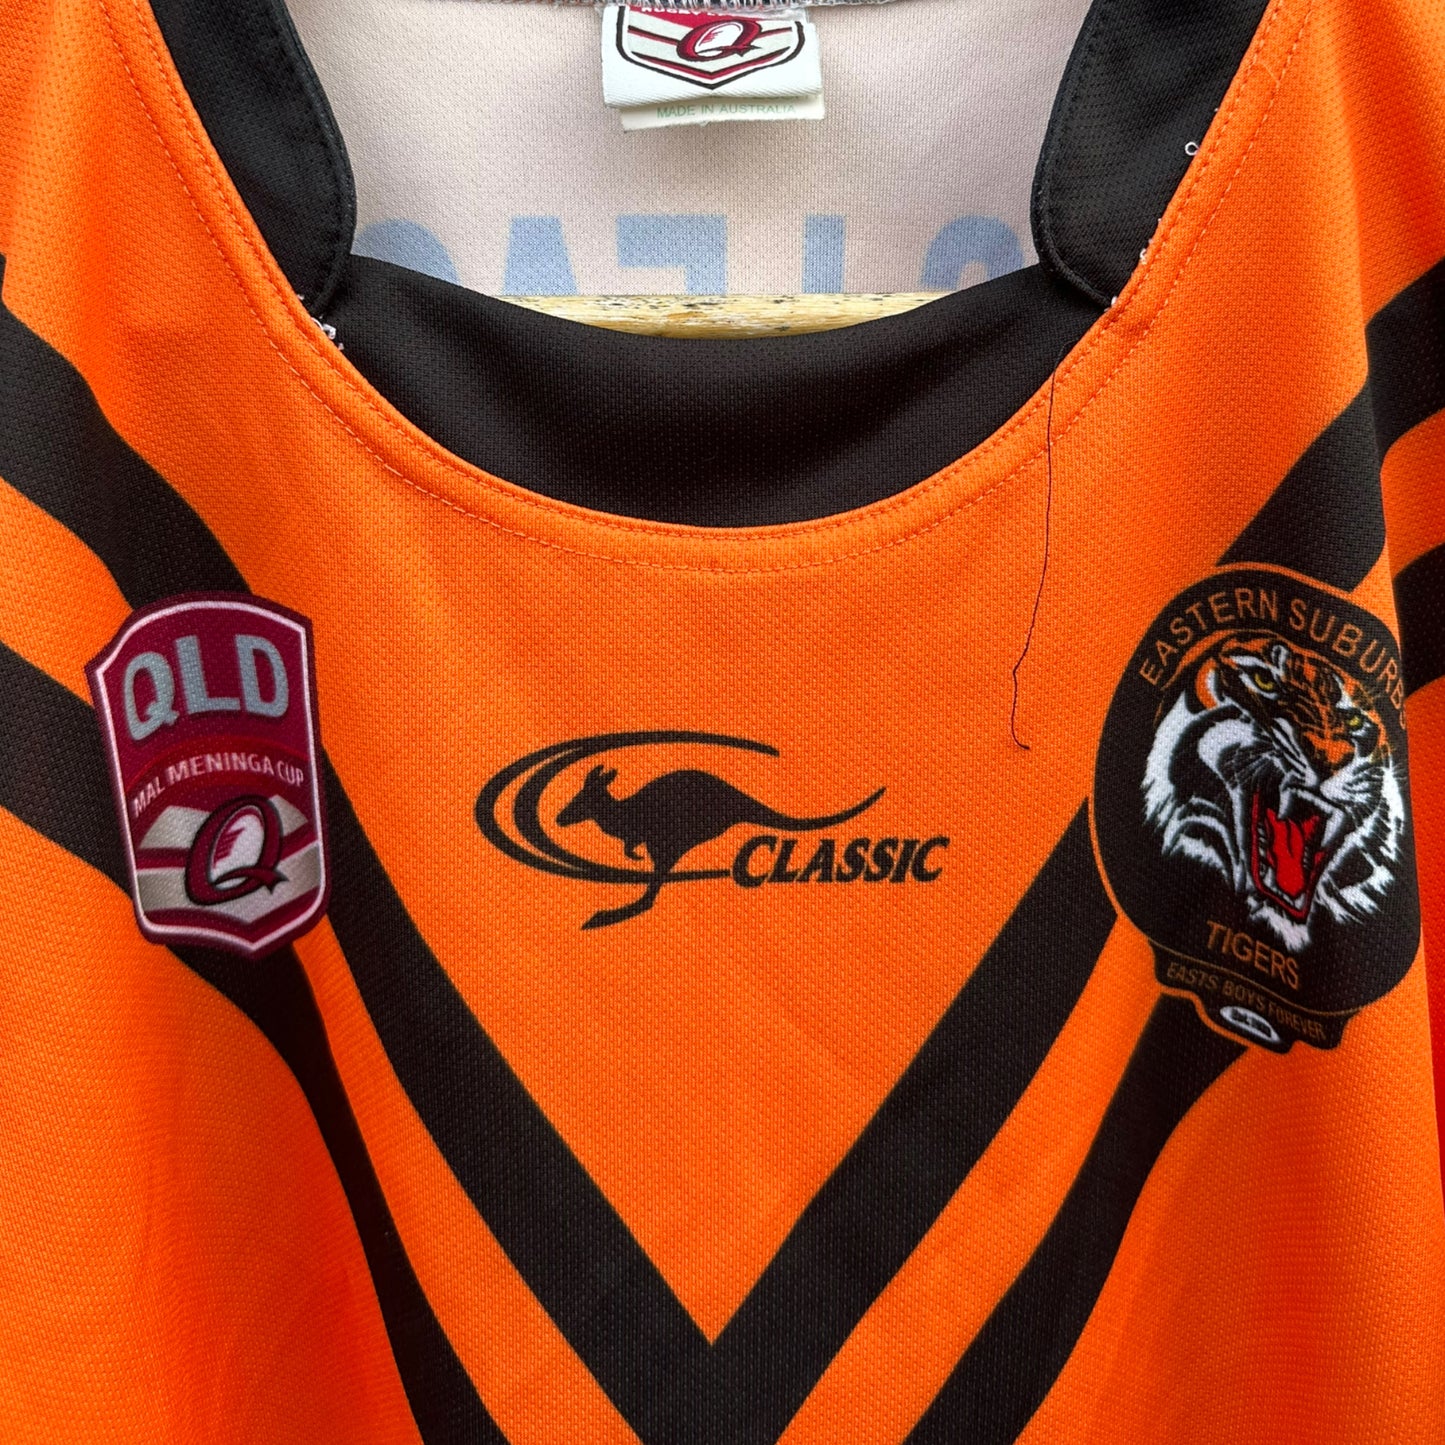 EASTS TIGERS MATCH WORN JERSEY